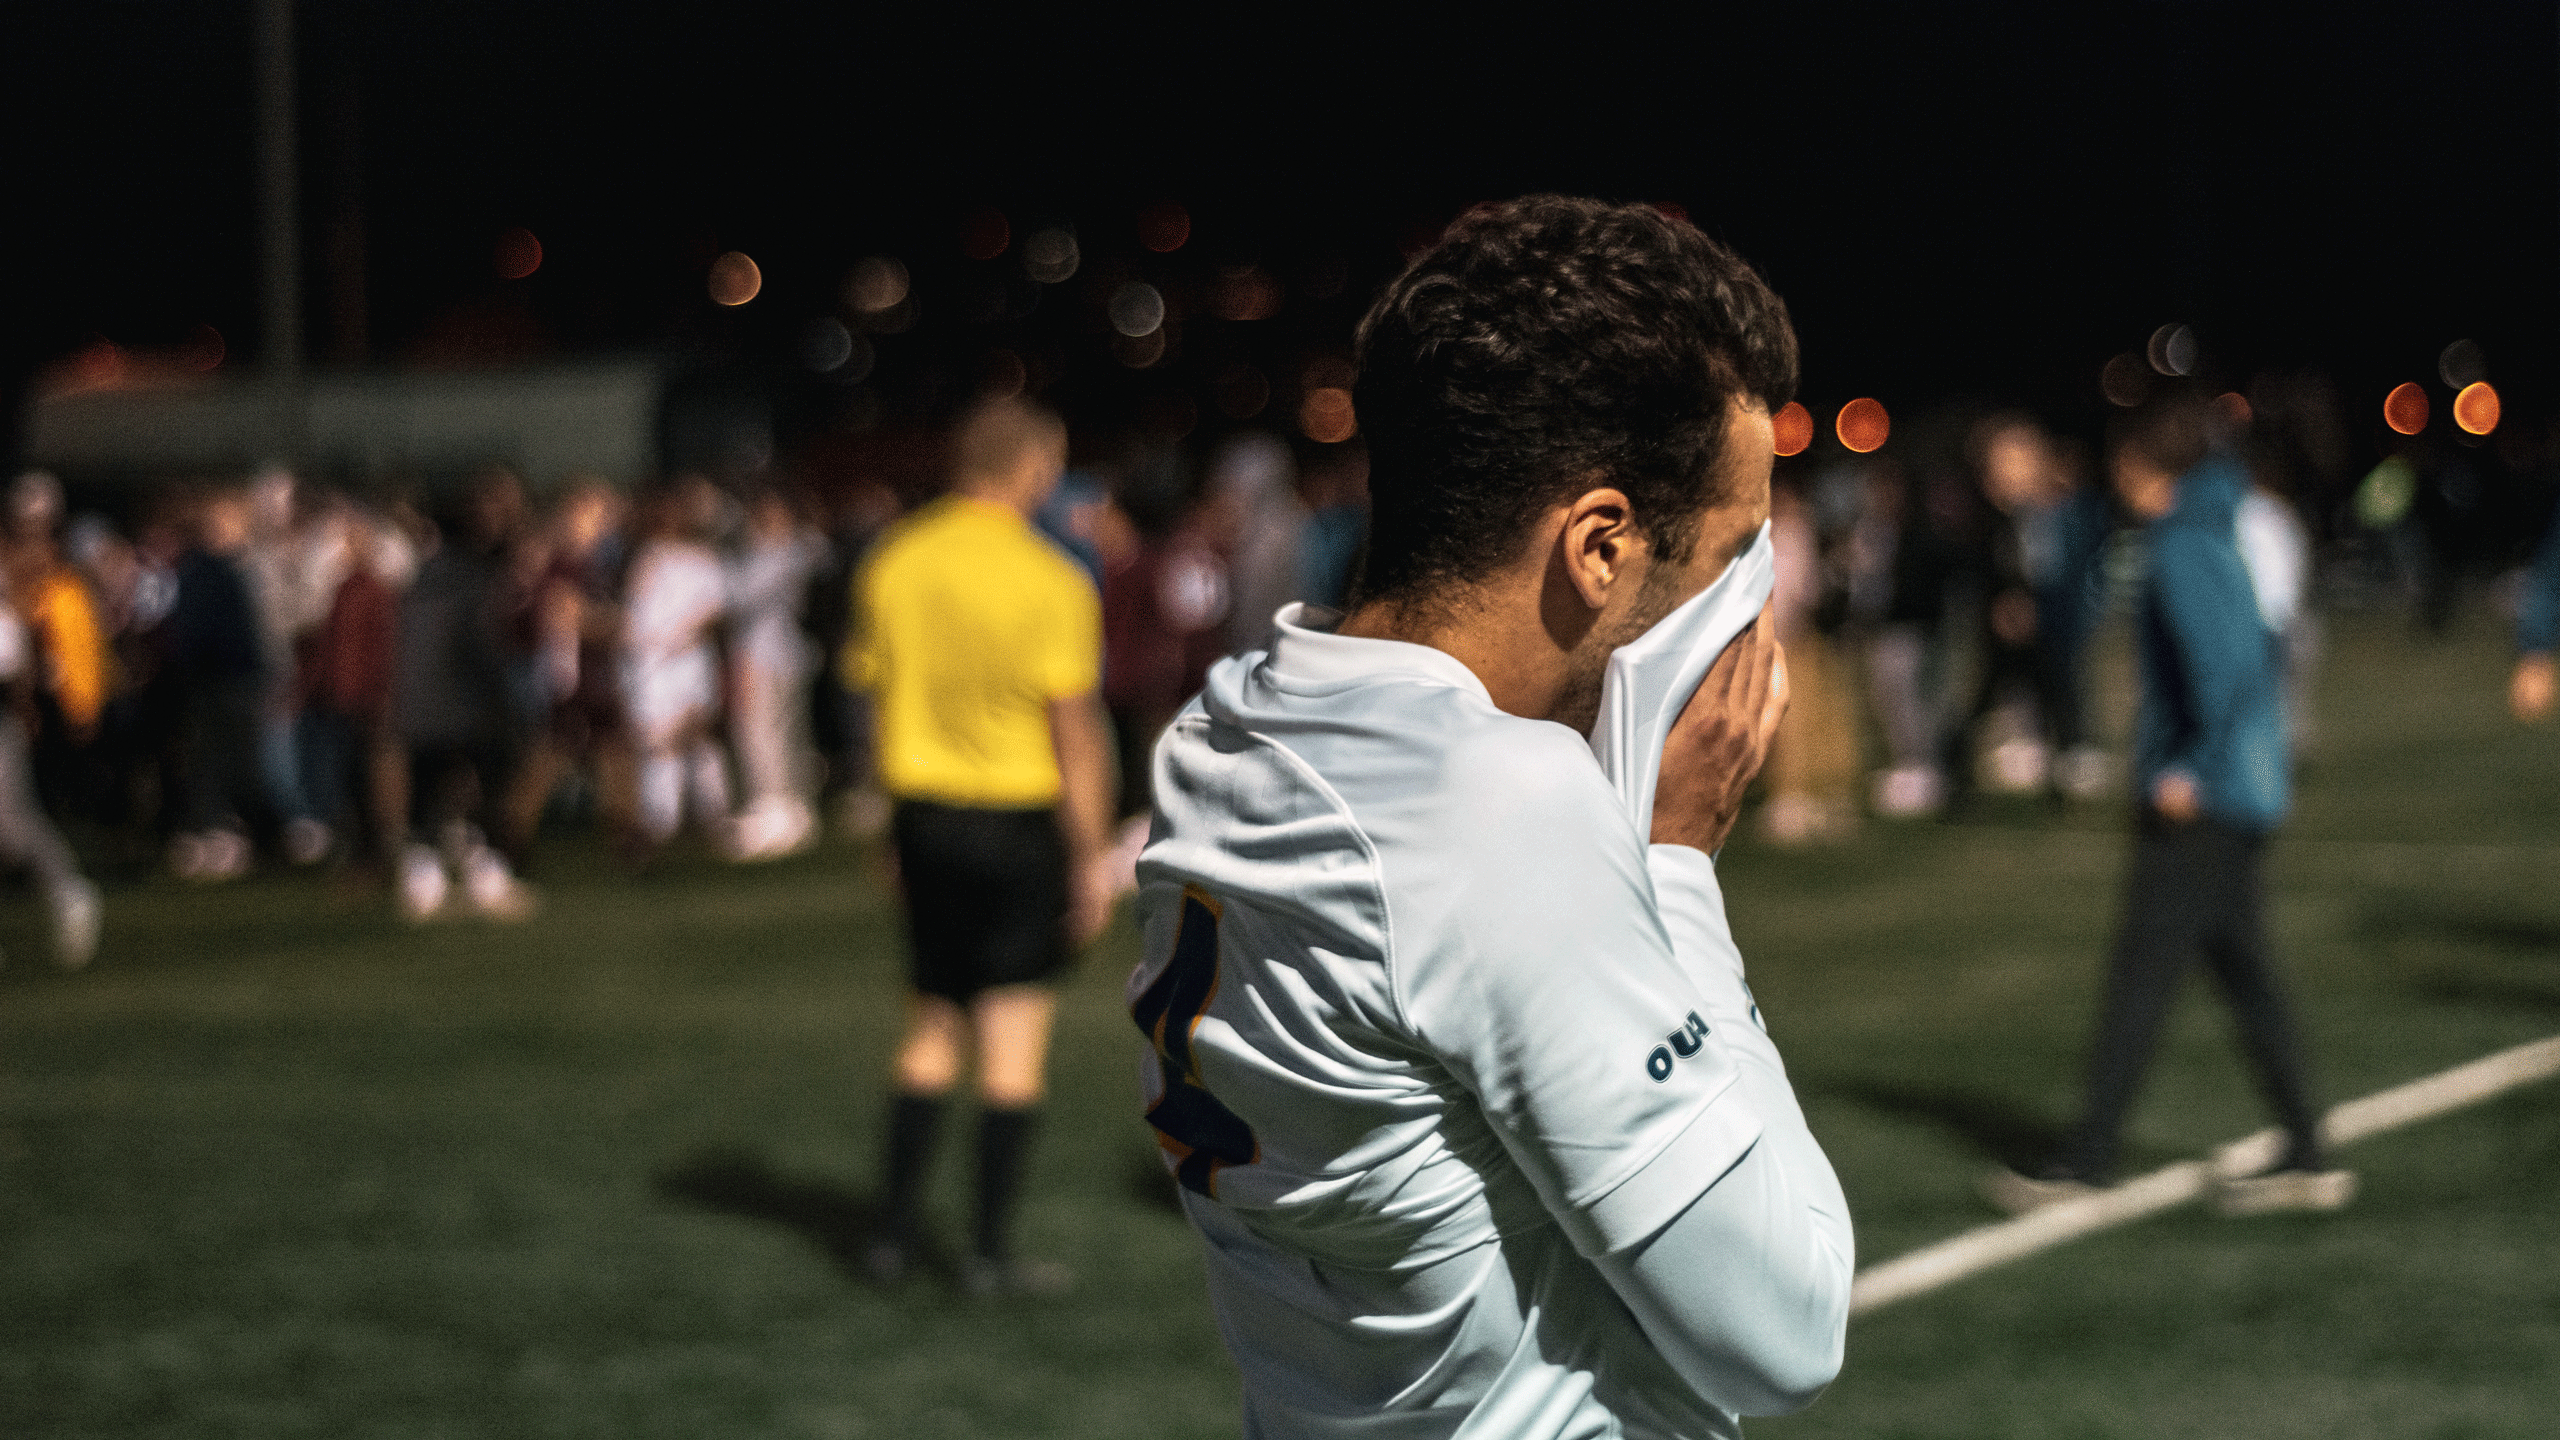 A men's soccer player in a white jersey puts his head in his jersey after a loss